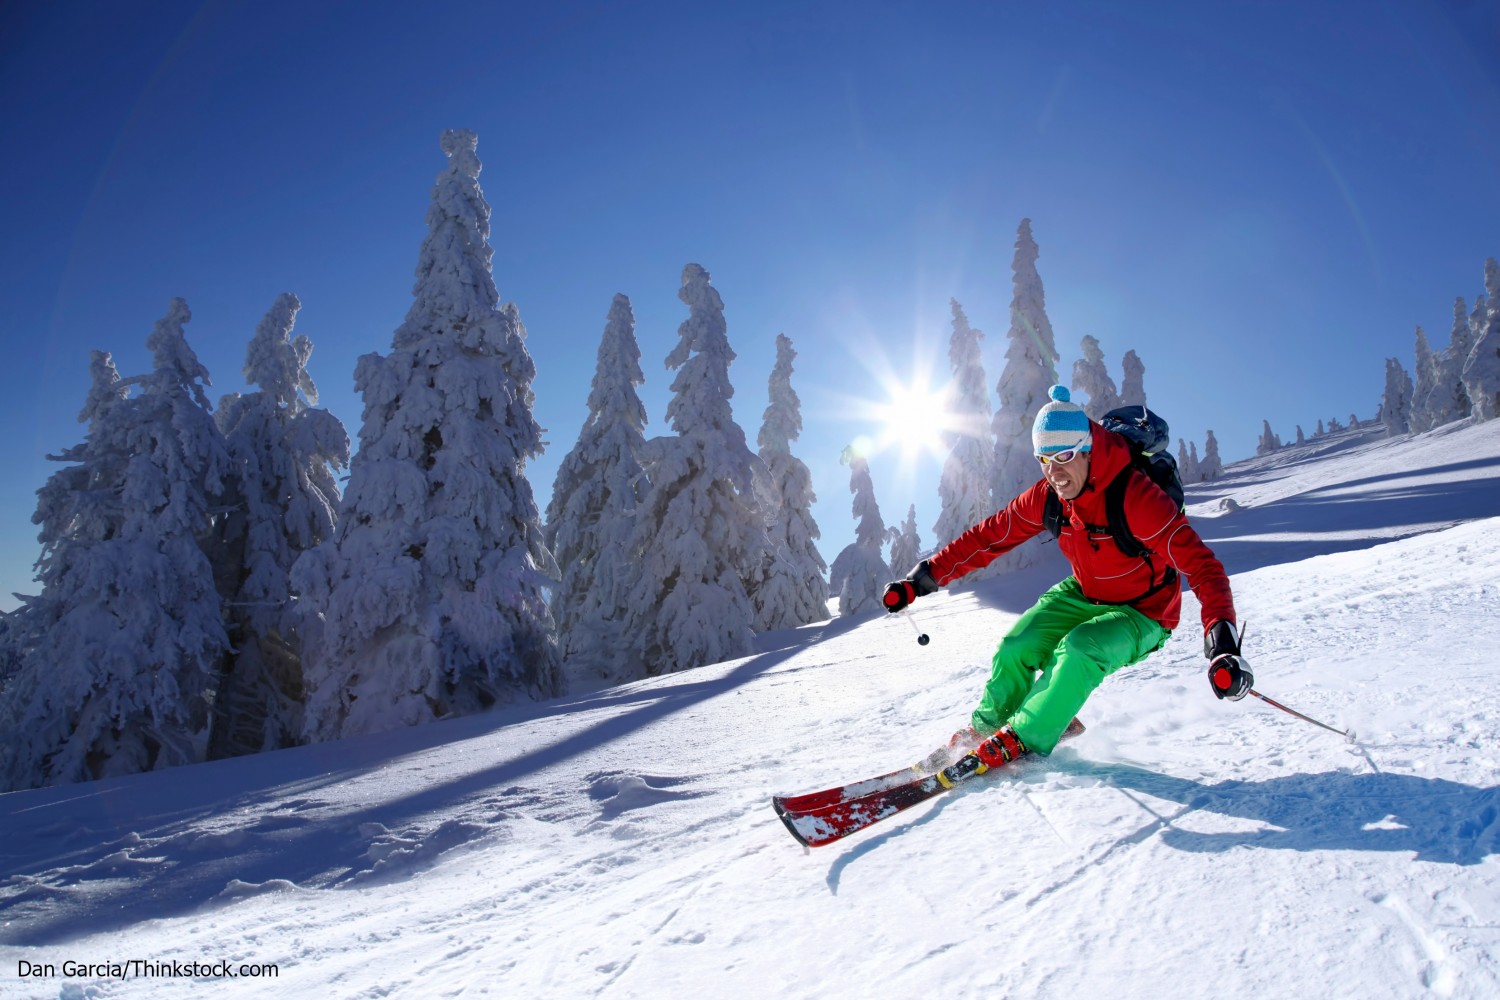 The Best Places to Go Skiing in the Poconos